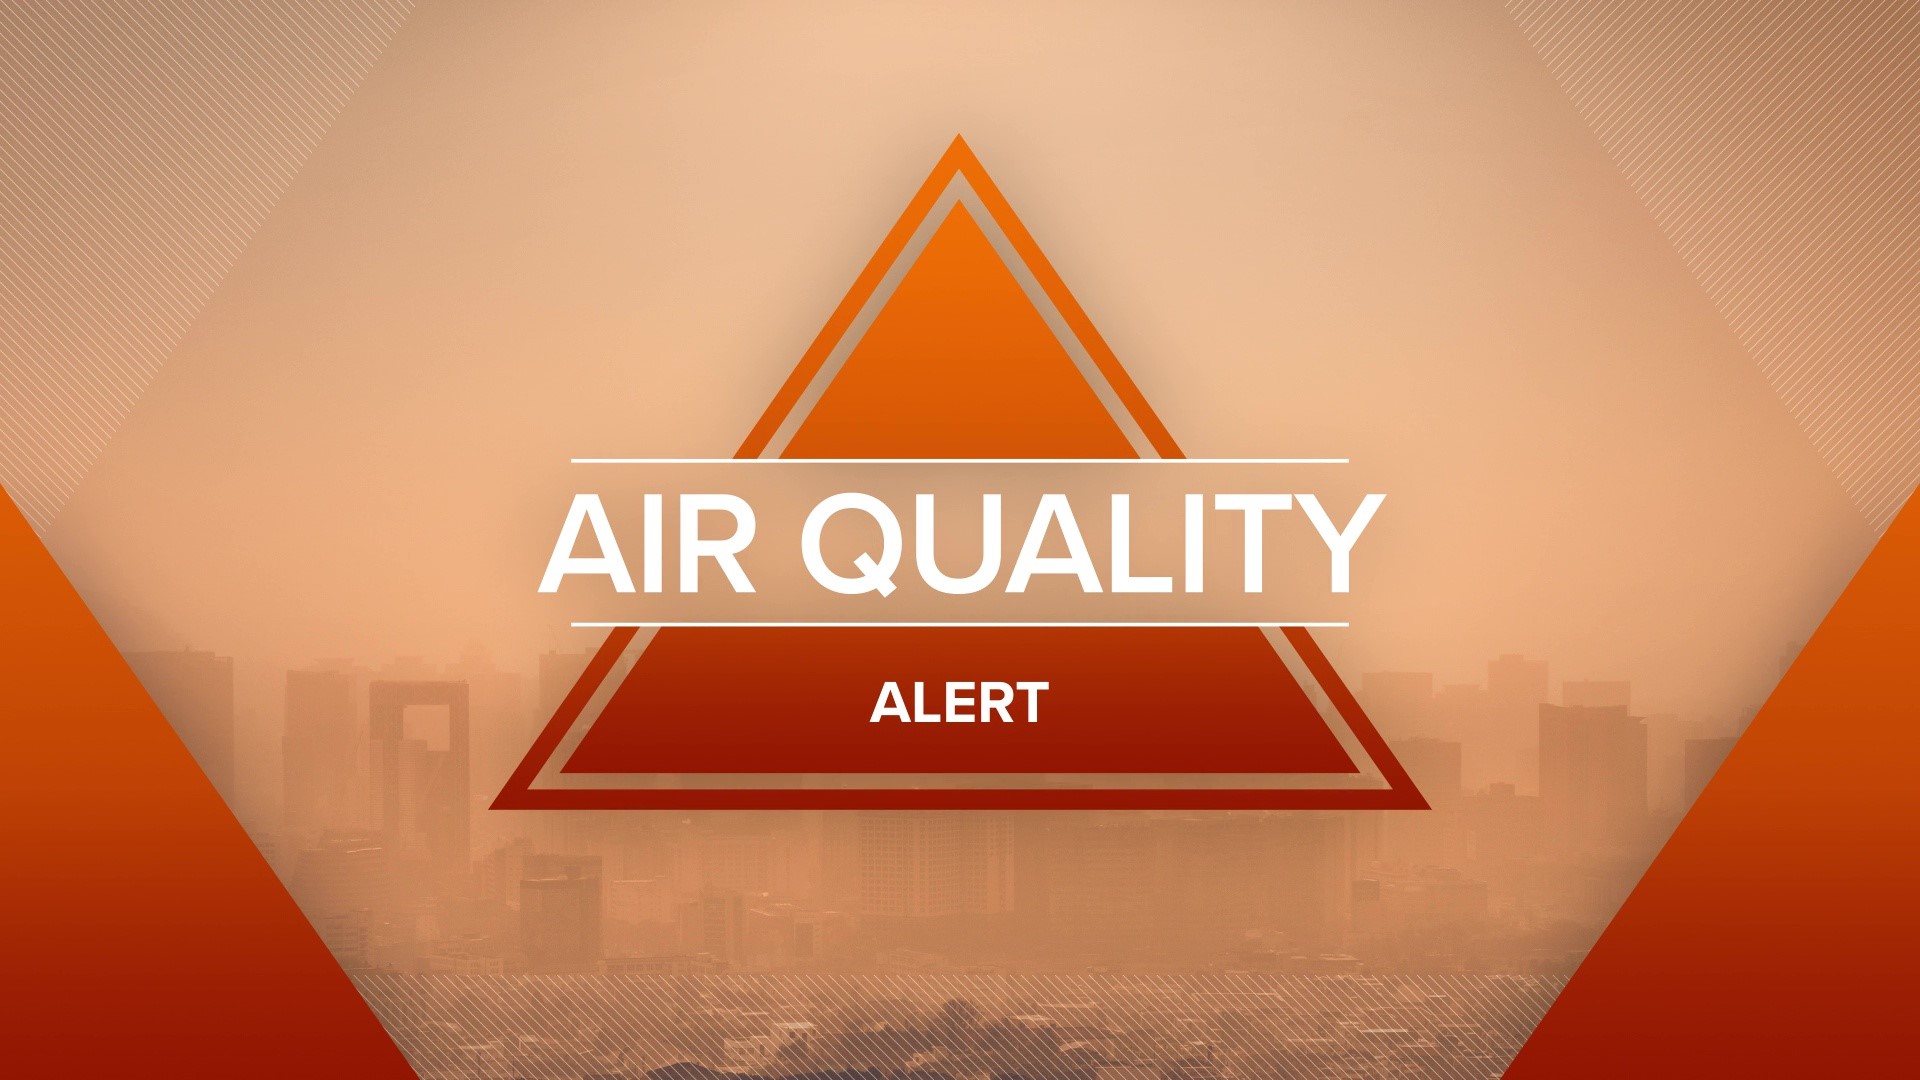 The air may be unhealthy for sensitive groups, such as those with breathing problems, the very old, or the very young.